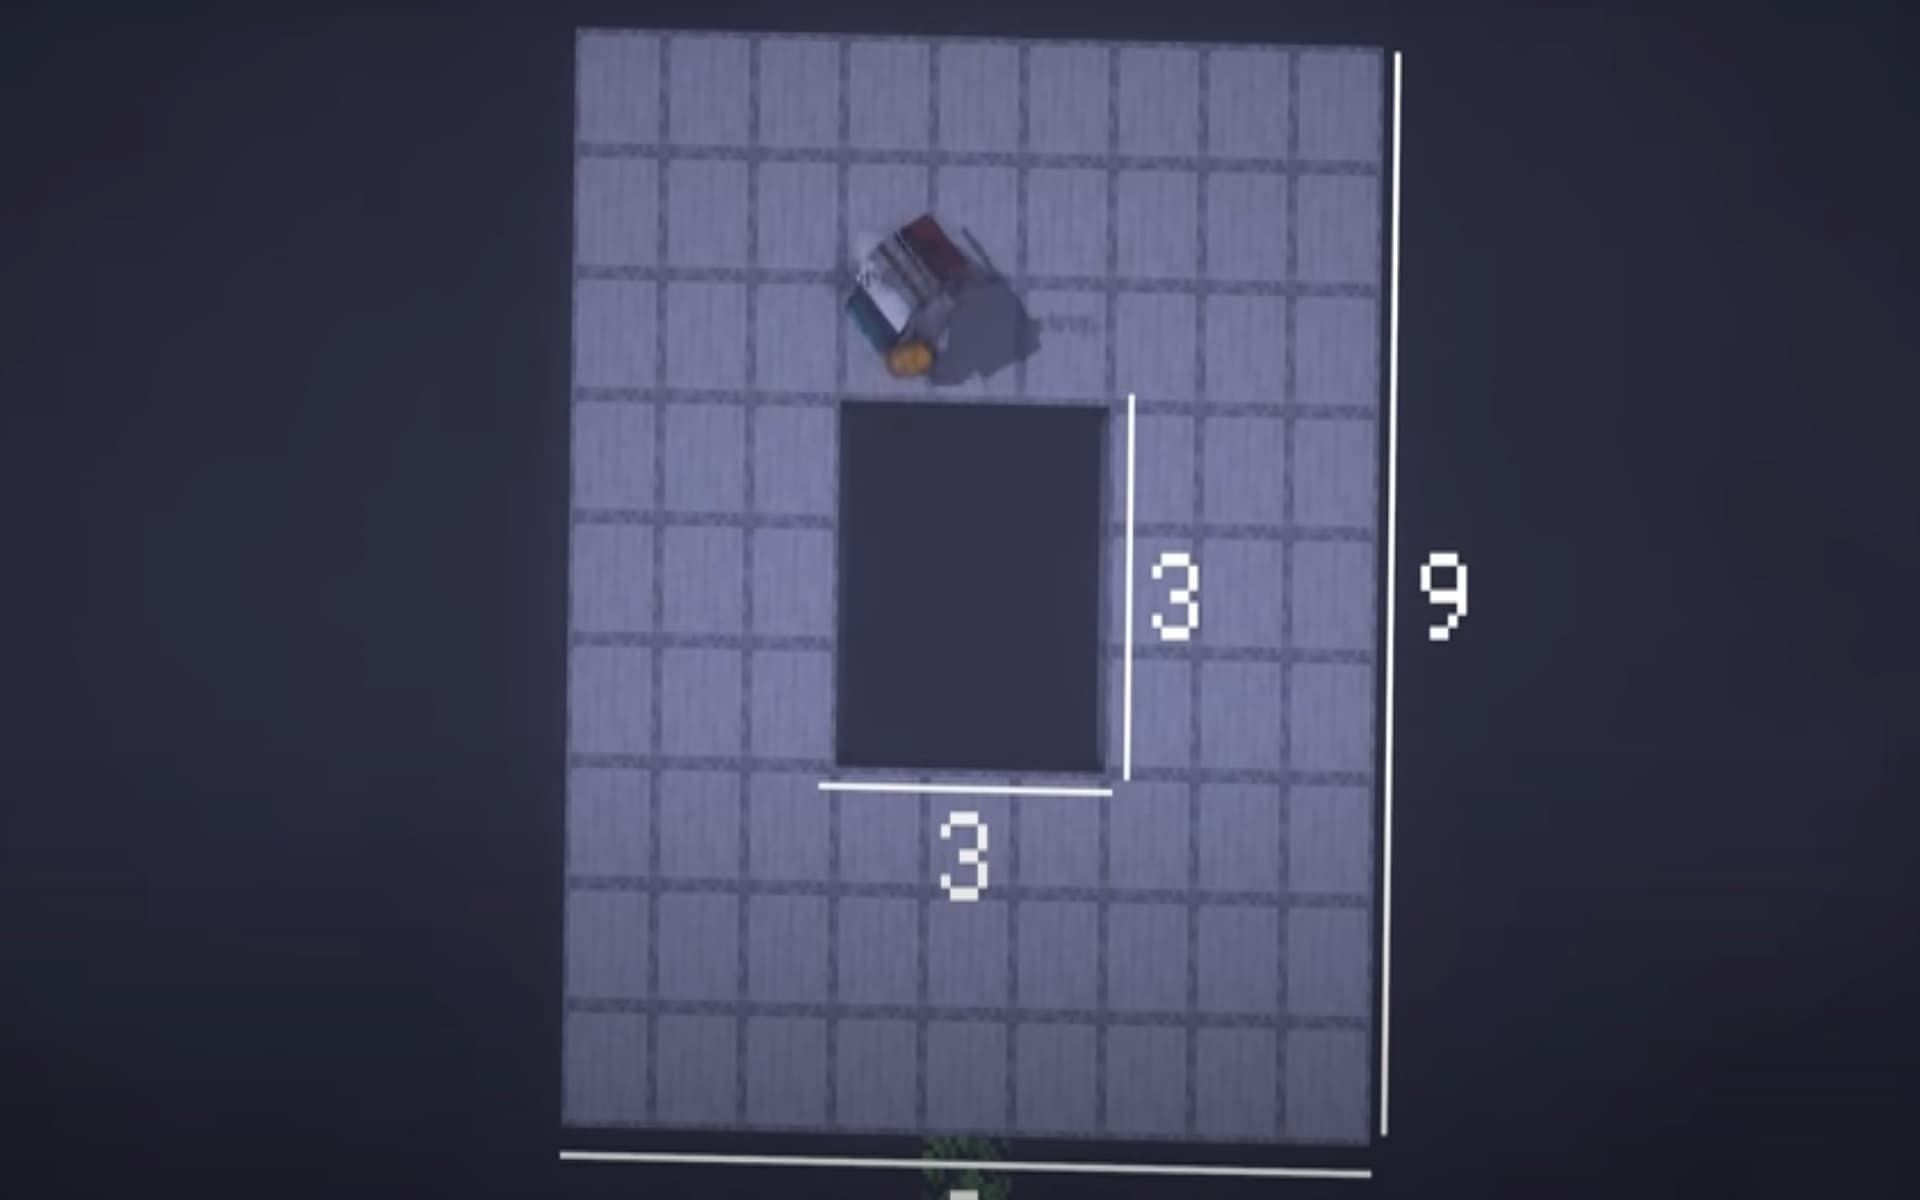 Build a 9x9 platform with a 3x3 hole in the middle (Image via YouTube/Moretingz)